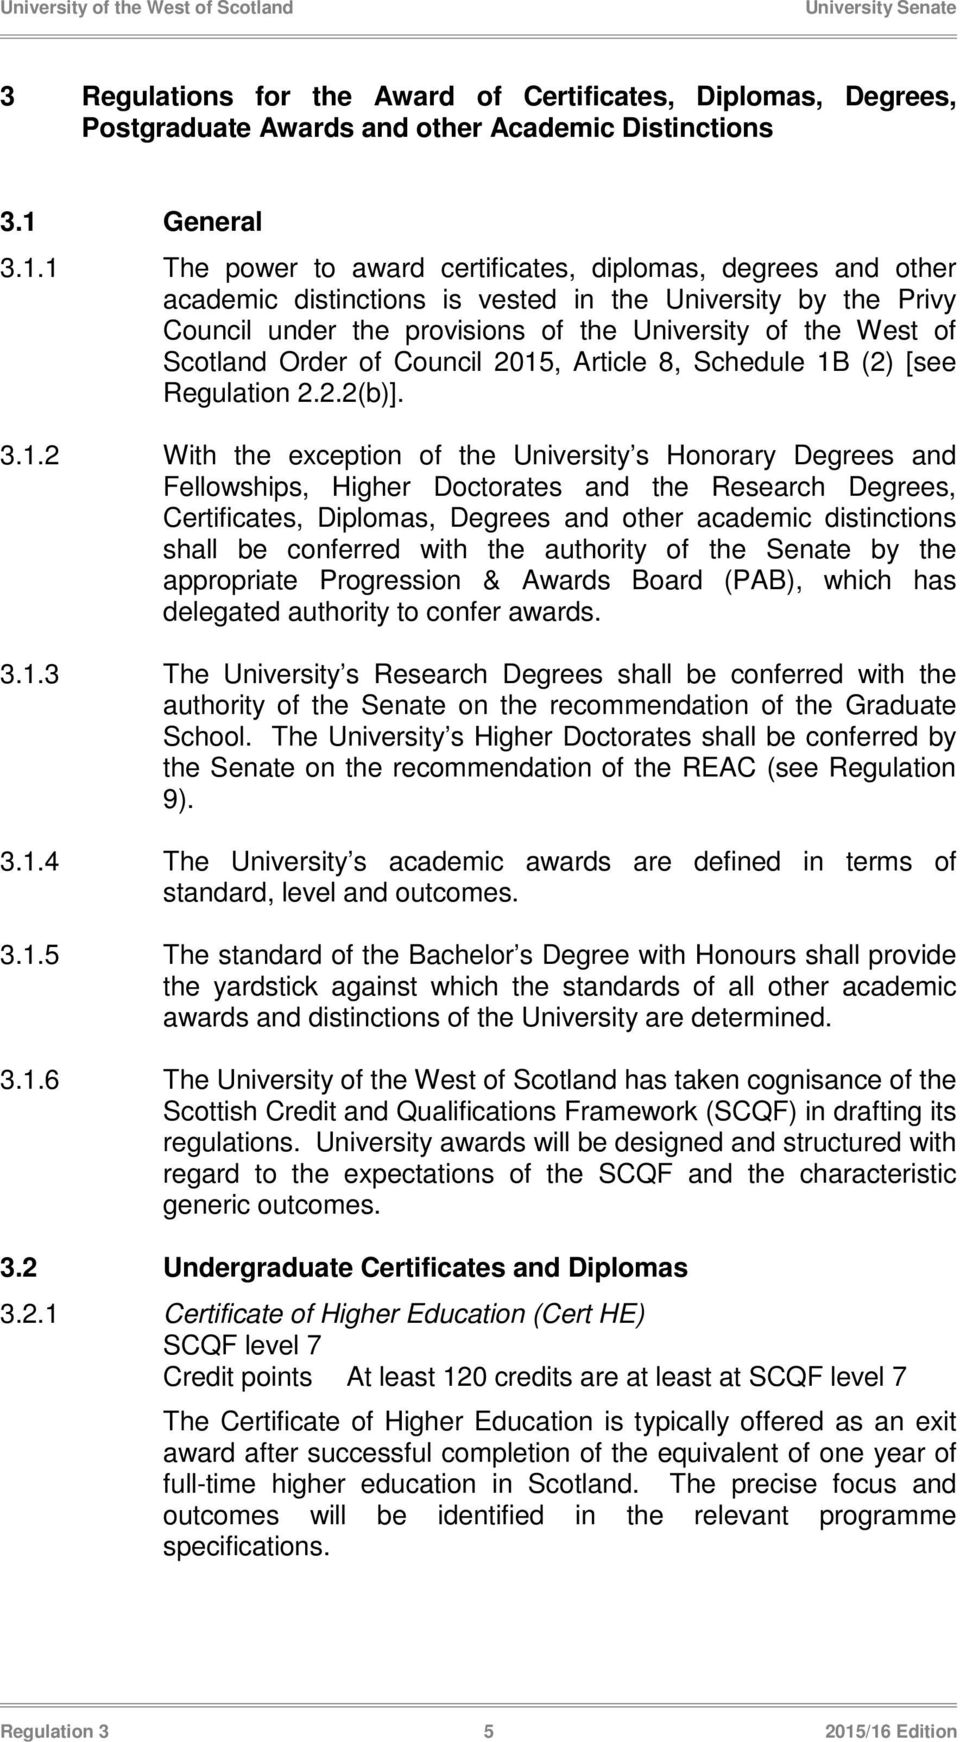 1 The power to award certificates, diplomas, degrees and other academic distinctions is vested in the University by the Privy Council under the provisions of the University of the West of Scotland